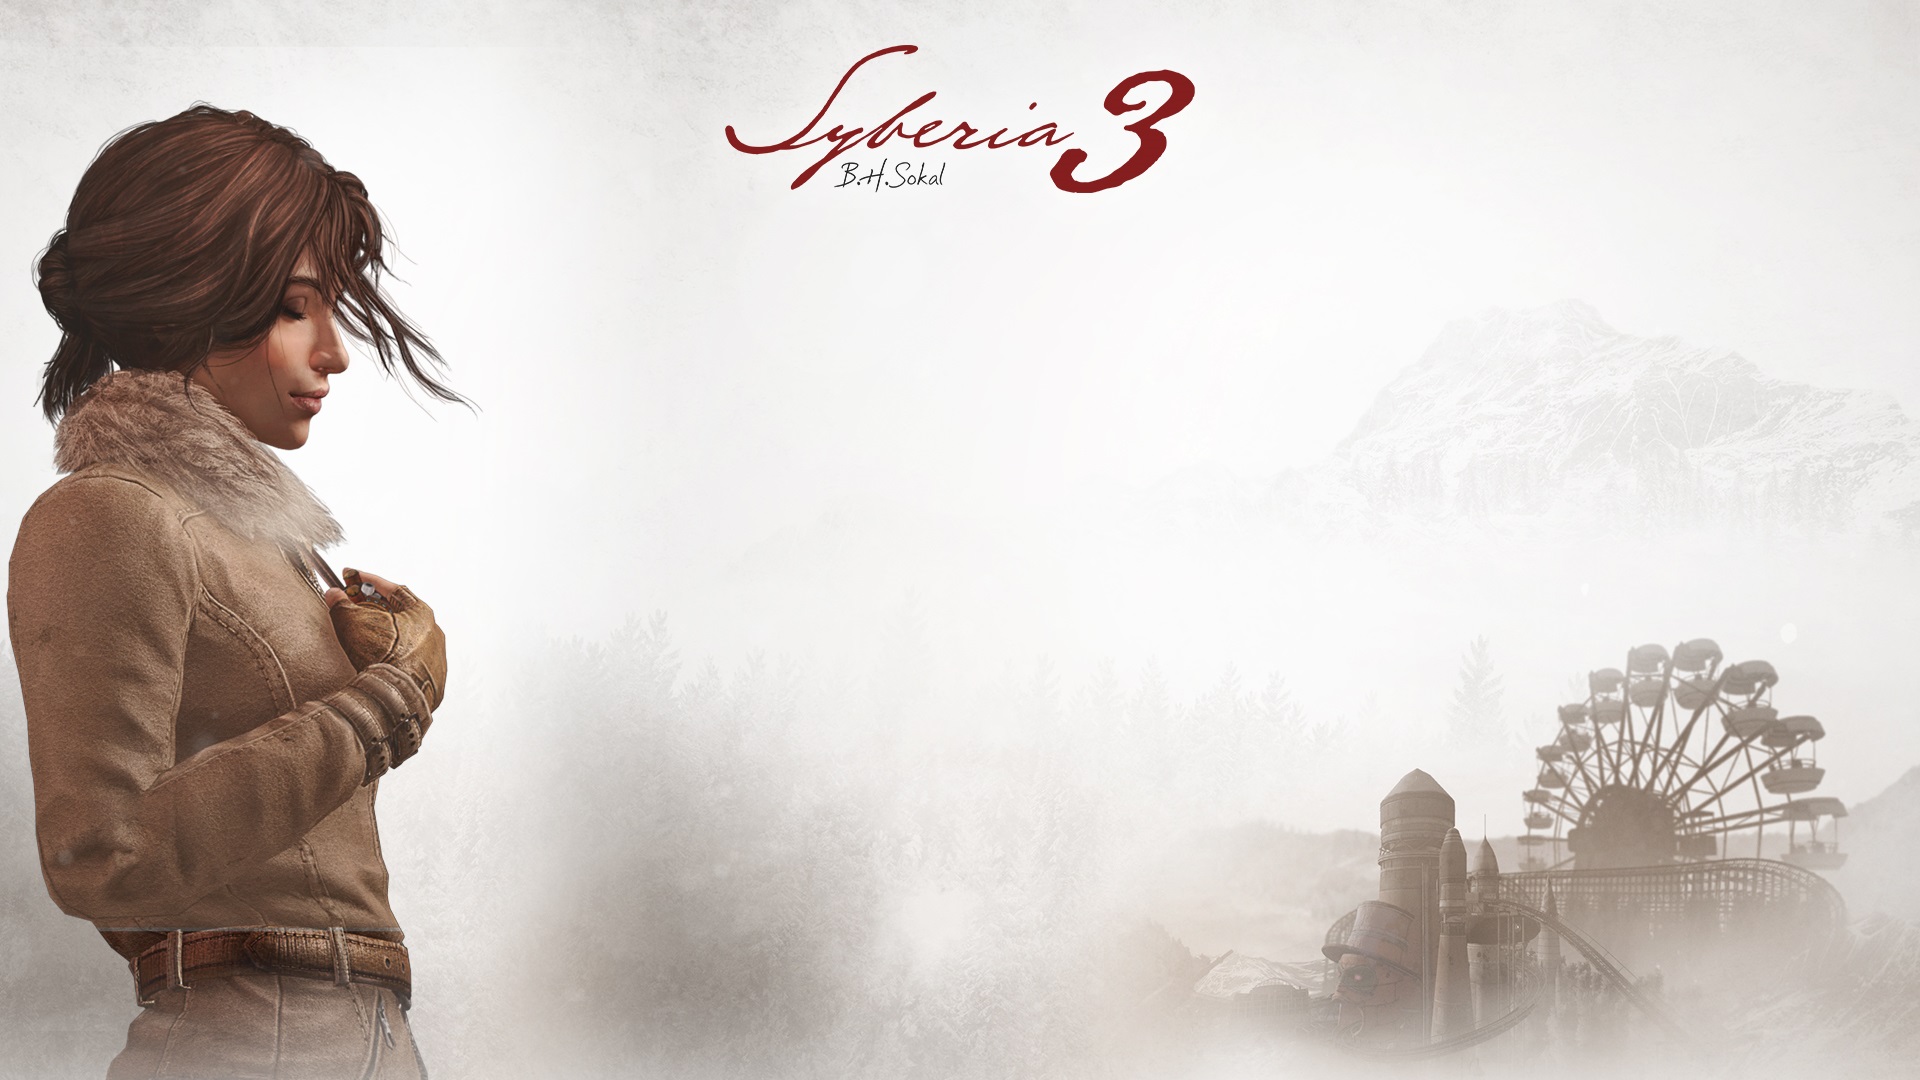 Wallpaper Syberia 3 video game, poster